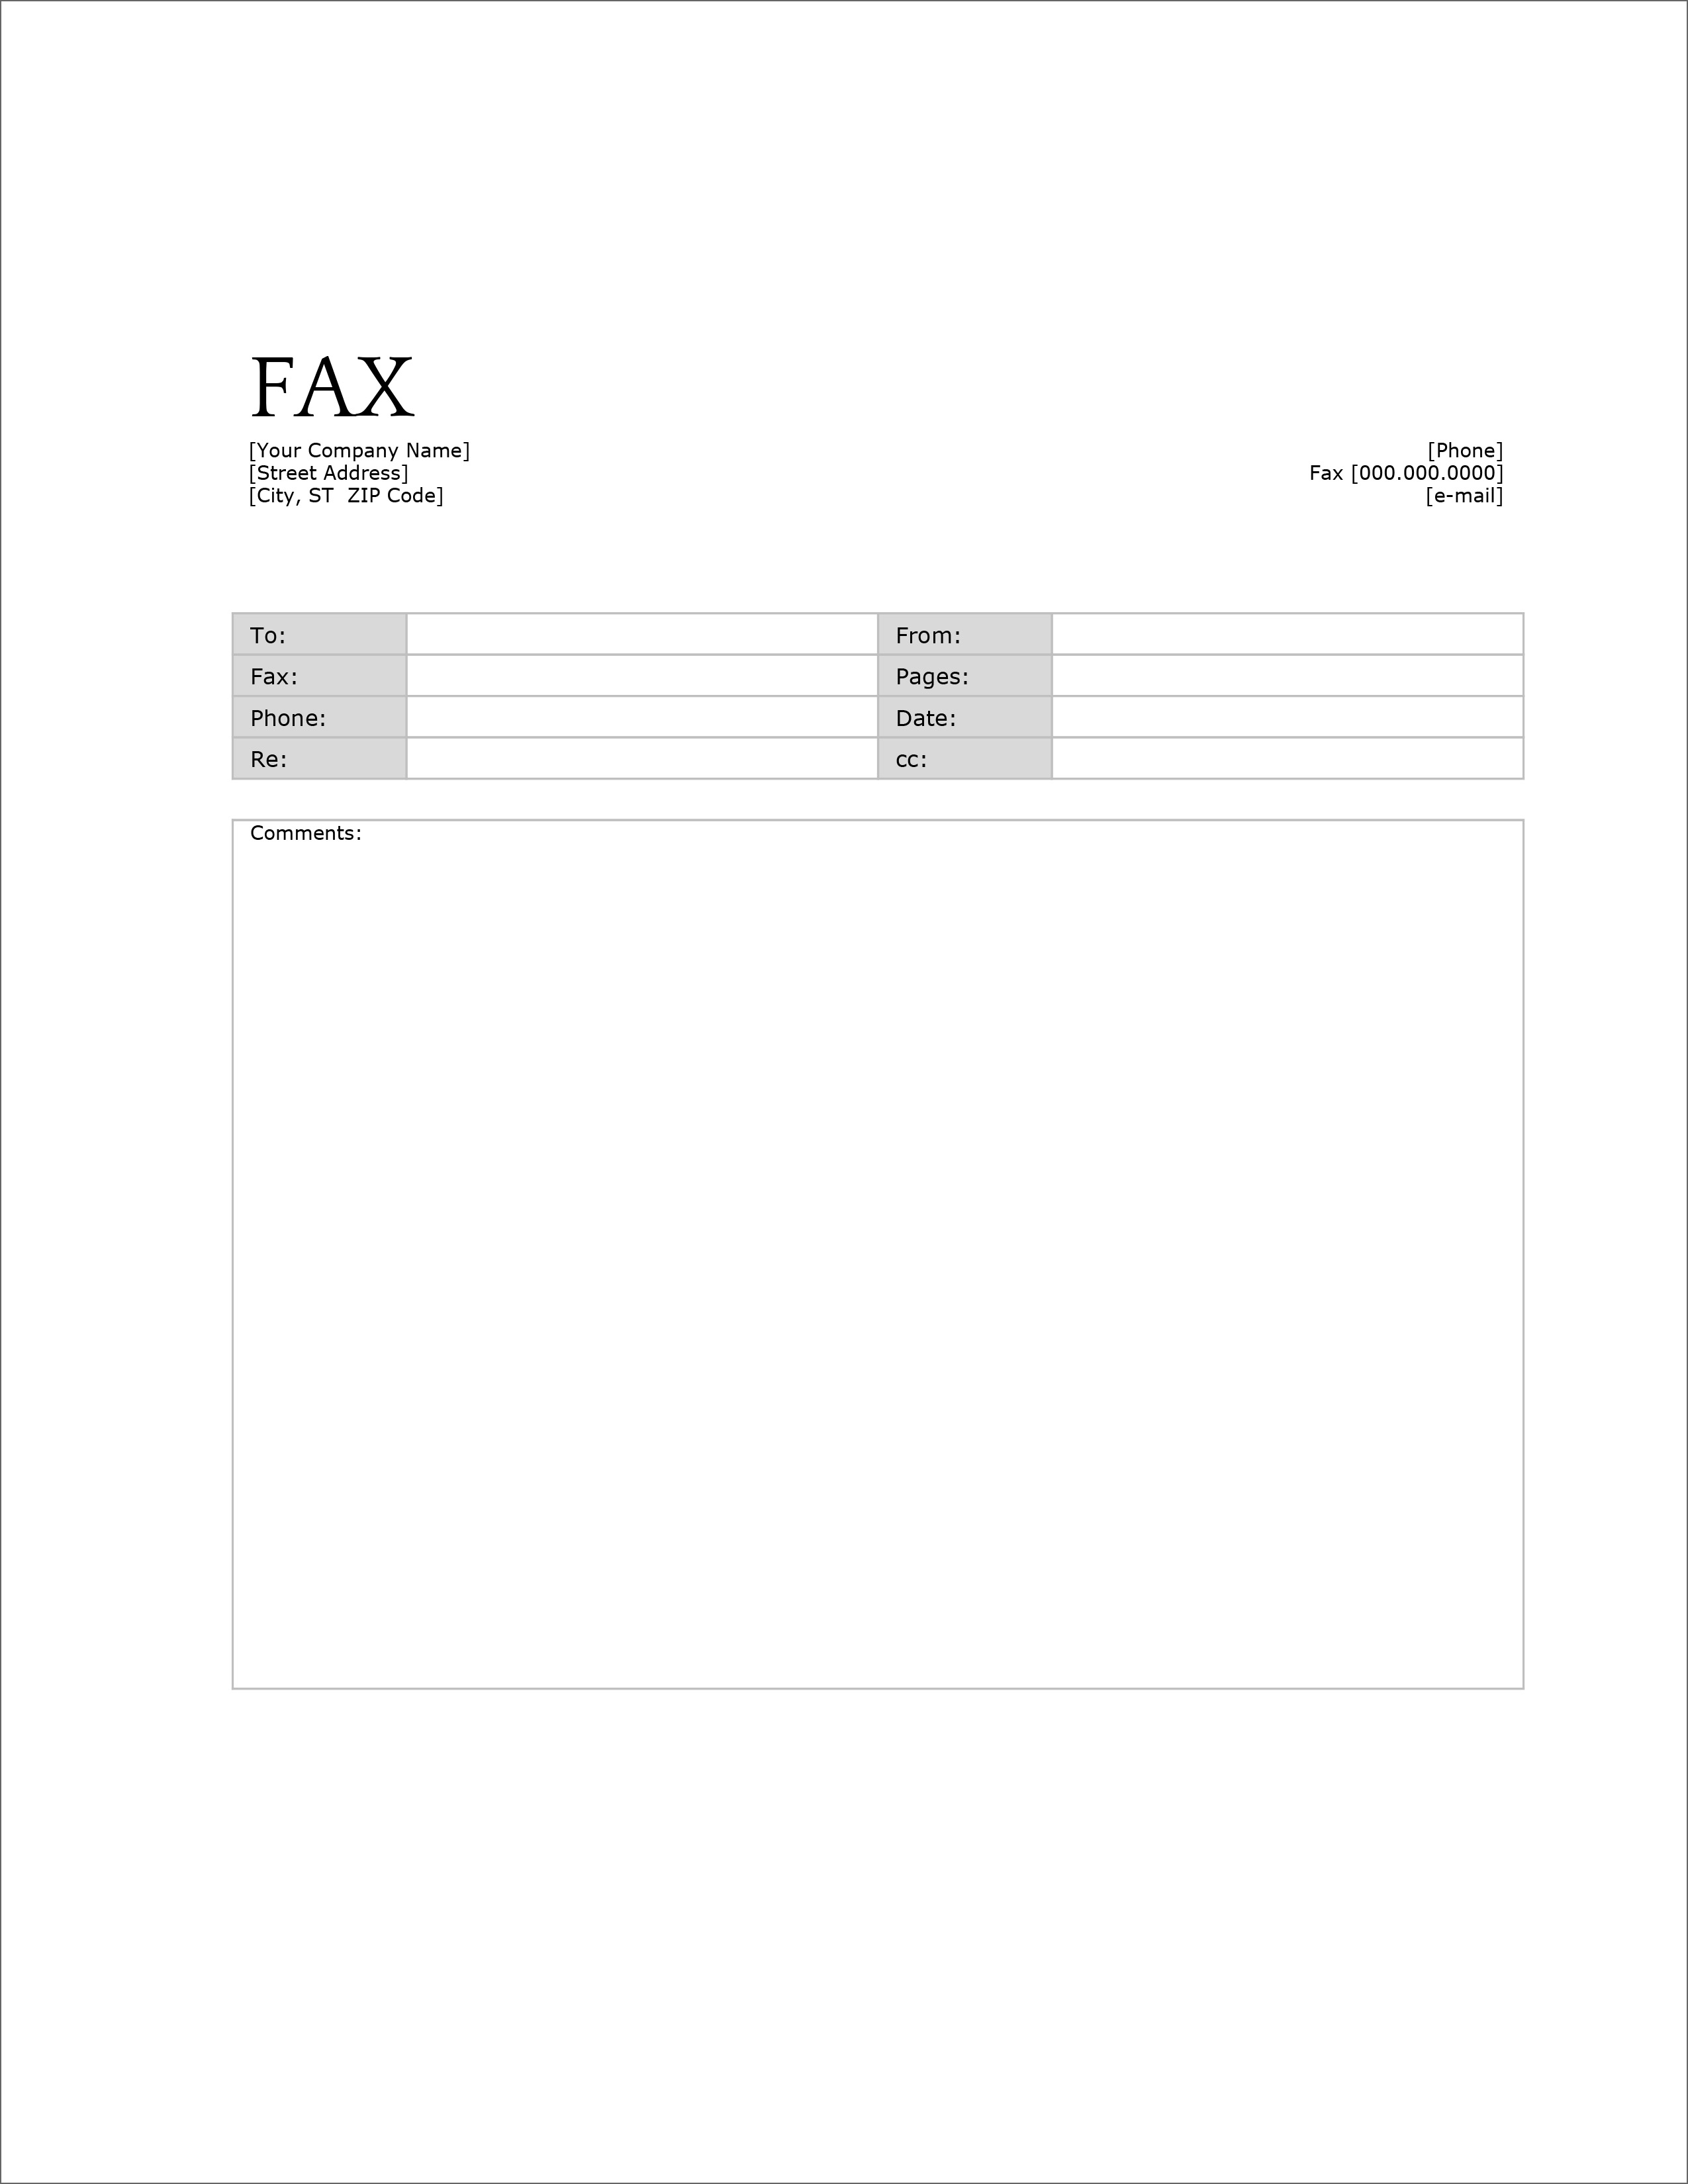 how to fax from microsoft word online free